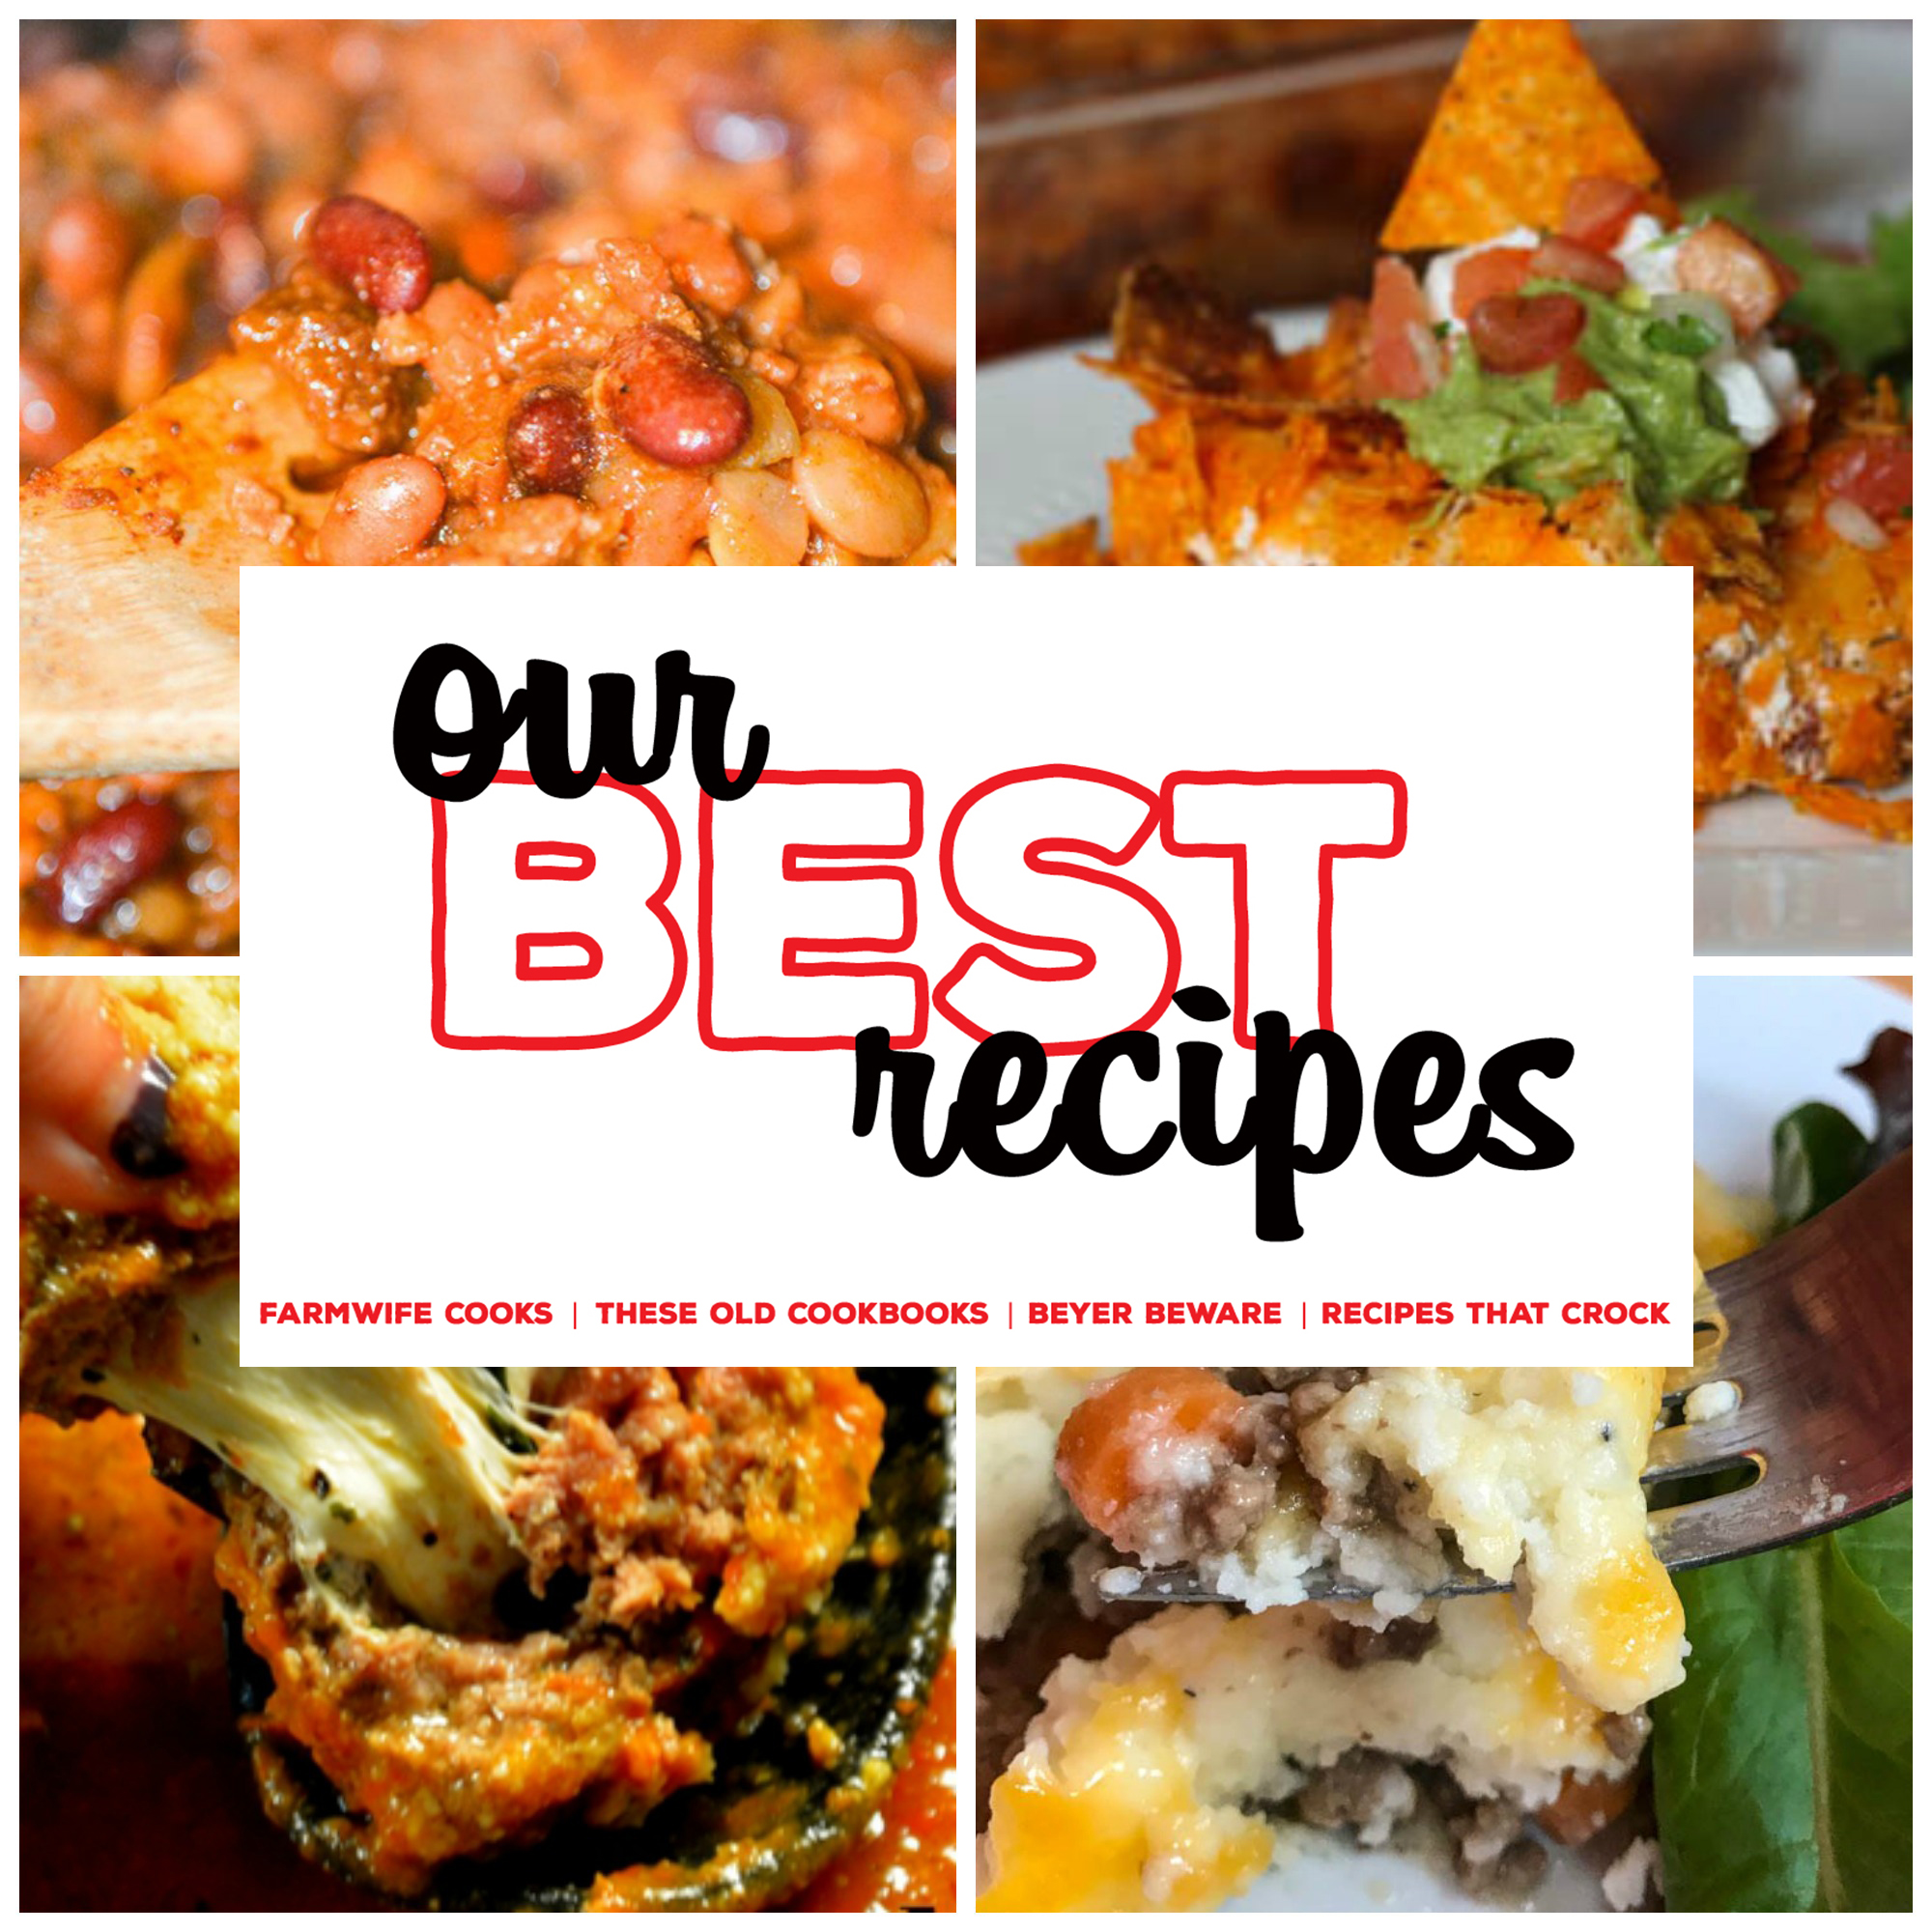 Are you looking for a new ground beef recipe? These quick and easy ground beef recipes are some of the best! This collection of 8 Great Ground Beef Recipes includes family dinner ideas like Cowboy Beans, Taco Bake, Meatballs, Shepherd's Pie and more! Low Carb Ground Beef Recipes too!